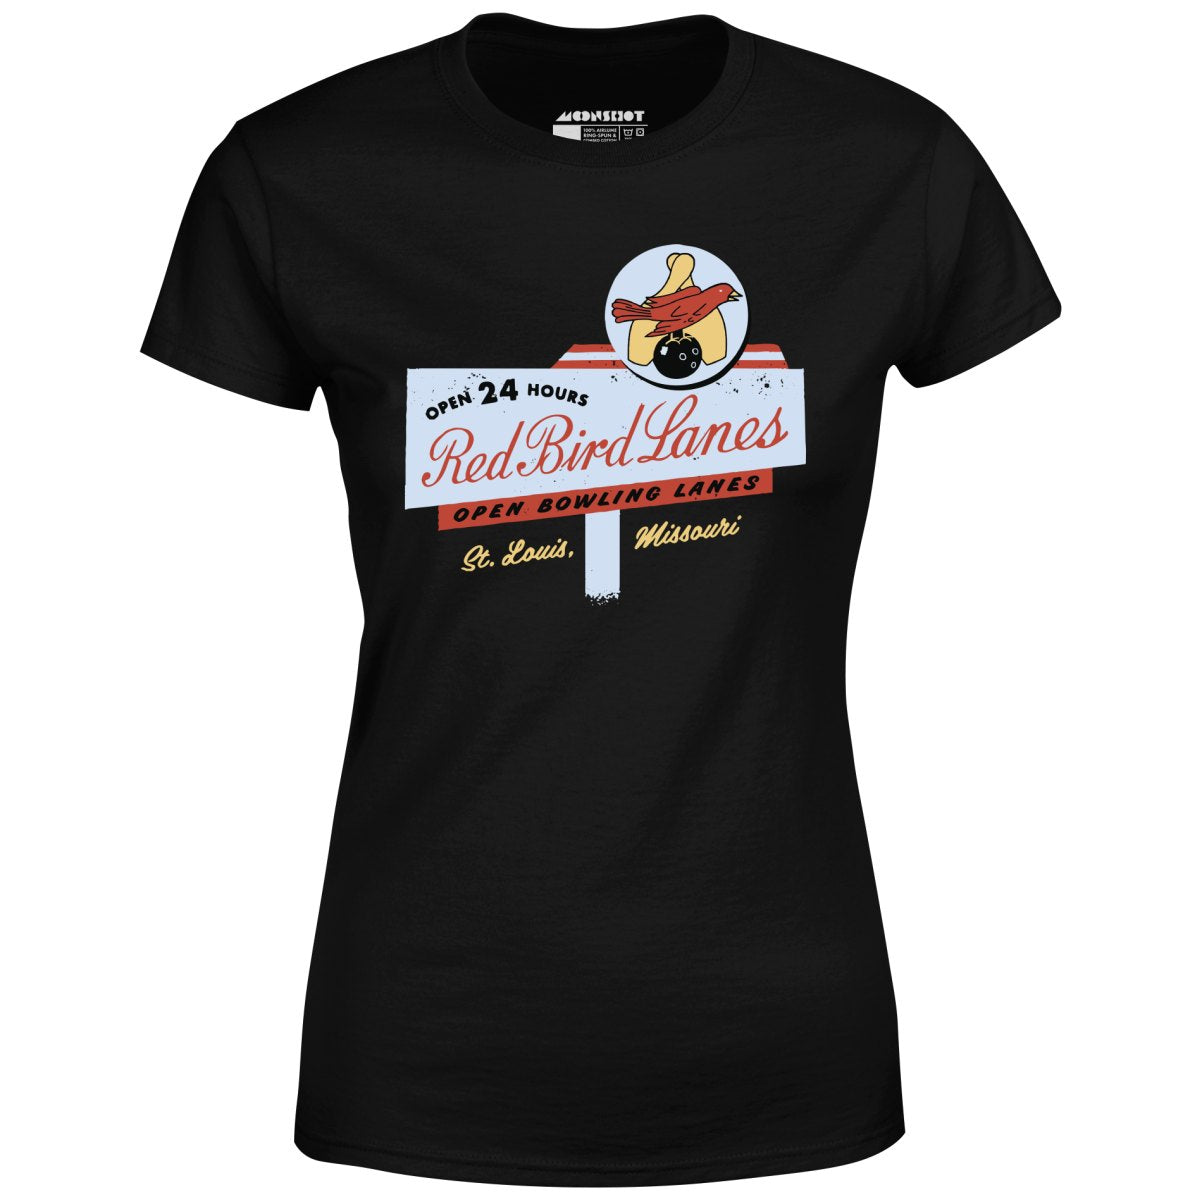 Red Bird Lanes v2 - St. Louis, MO - Vintage Bowling Alley - Women's T-Shirt